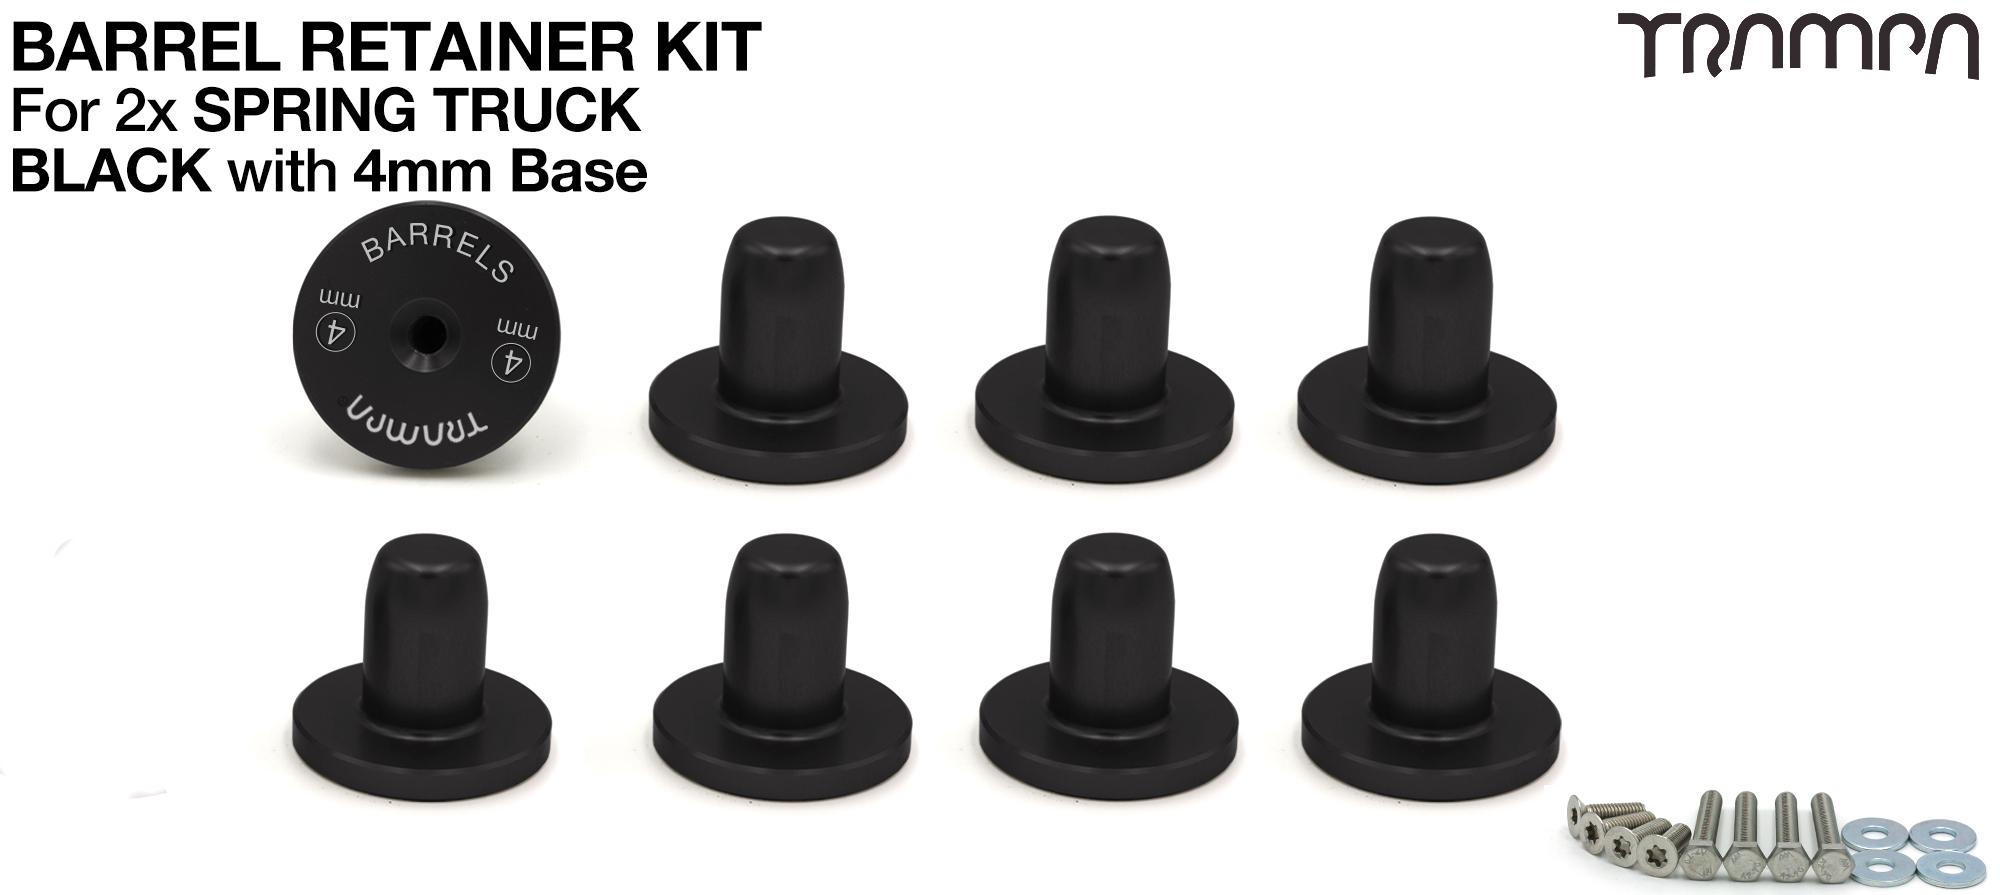 BLACK Barrel RETAINERS x8 with 4mm Base